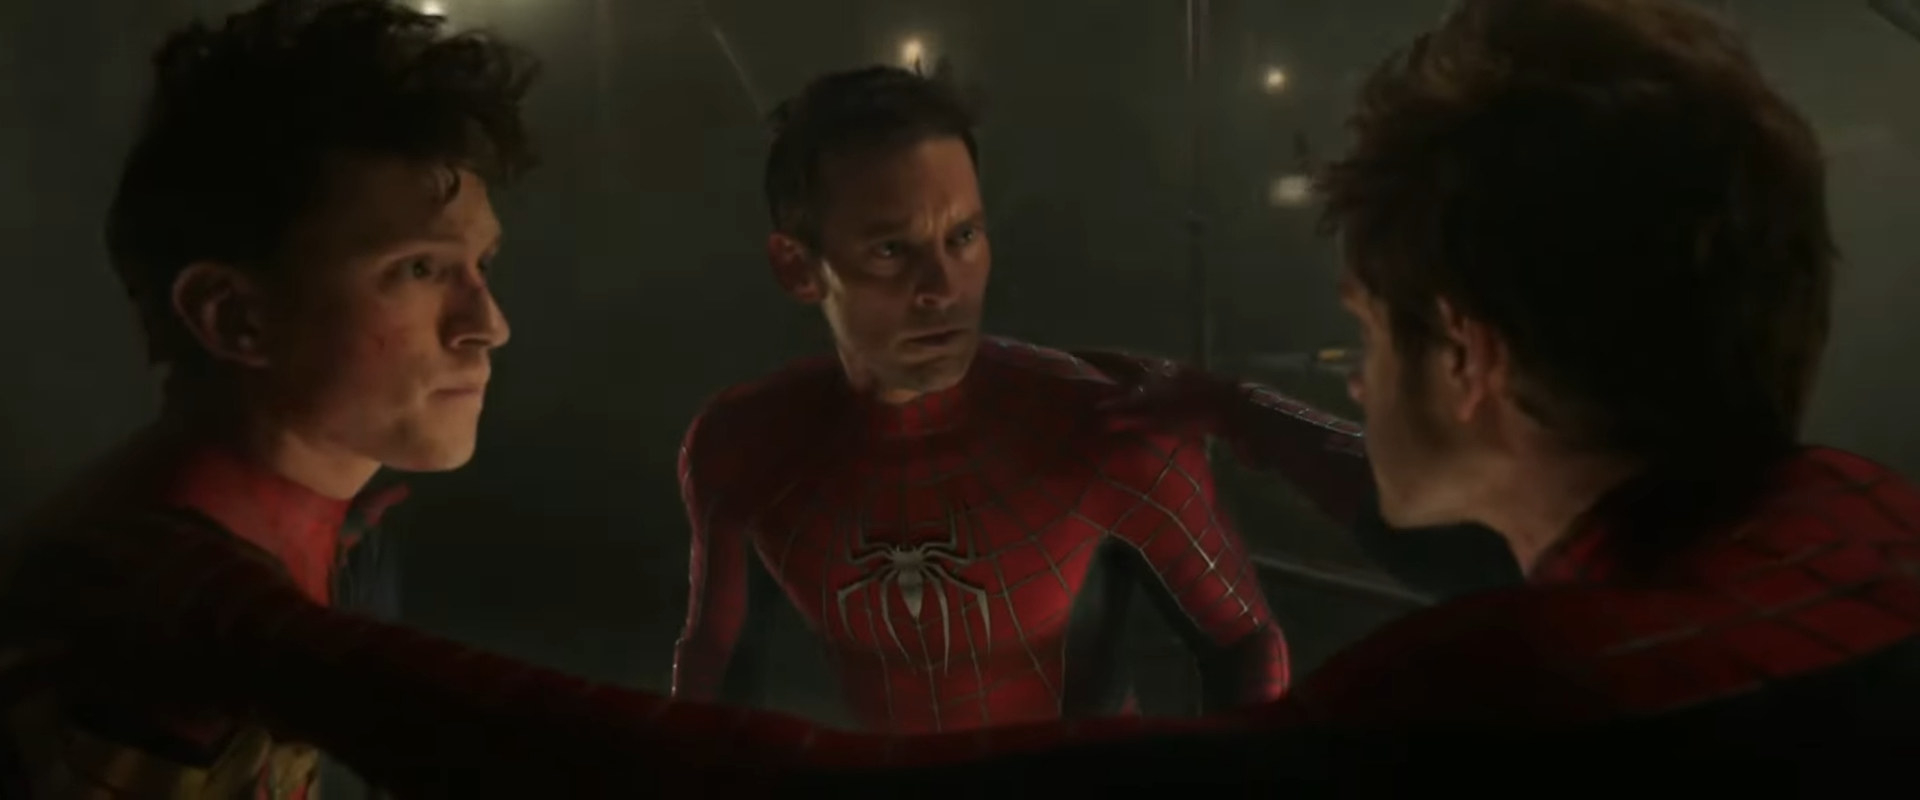 Tobey Maguire, Tom Holland, and Andrew Garfield as Spider-Man